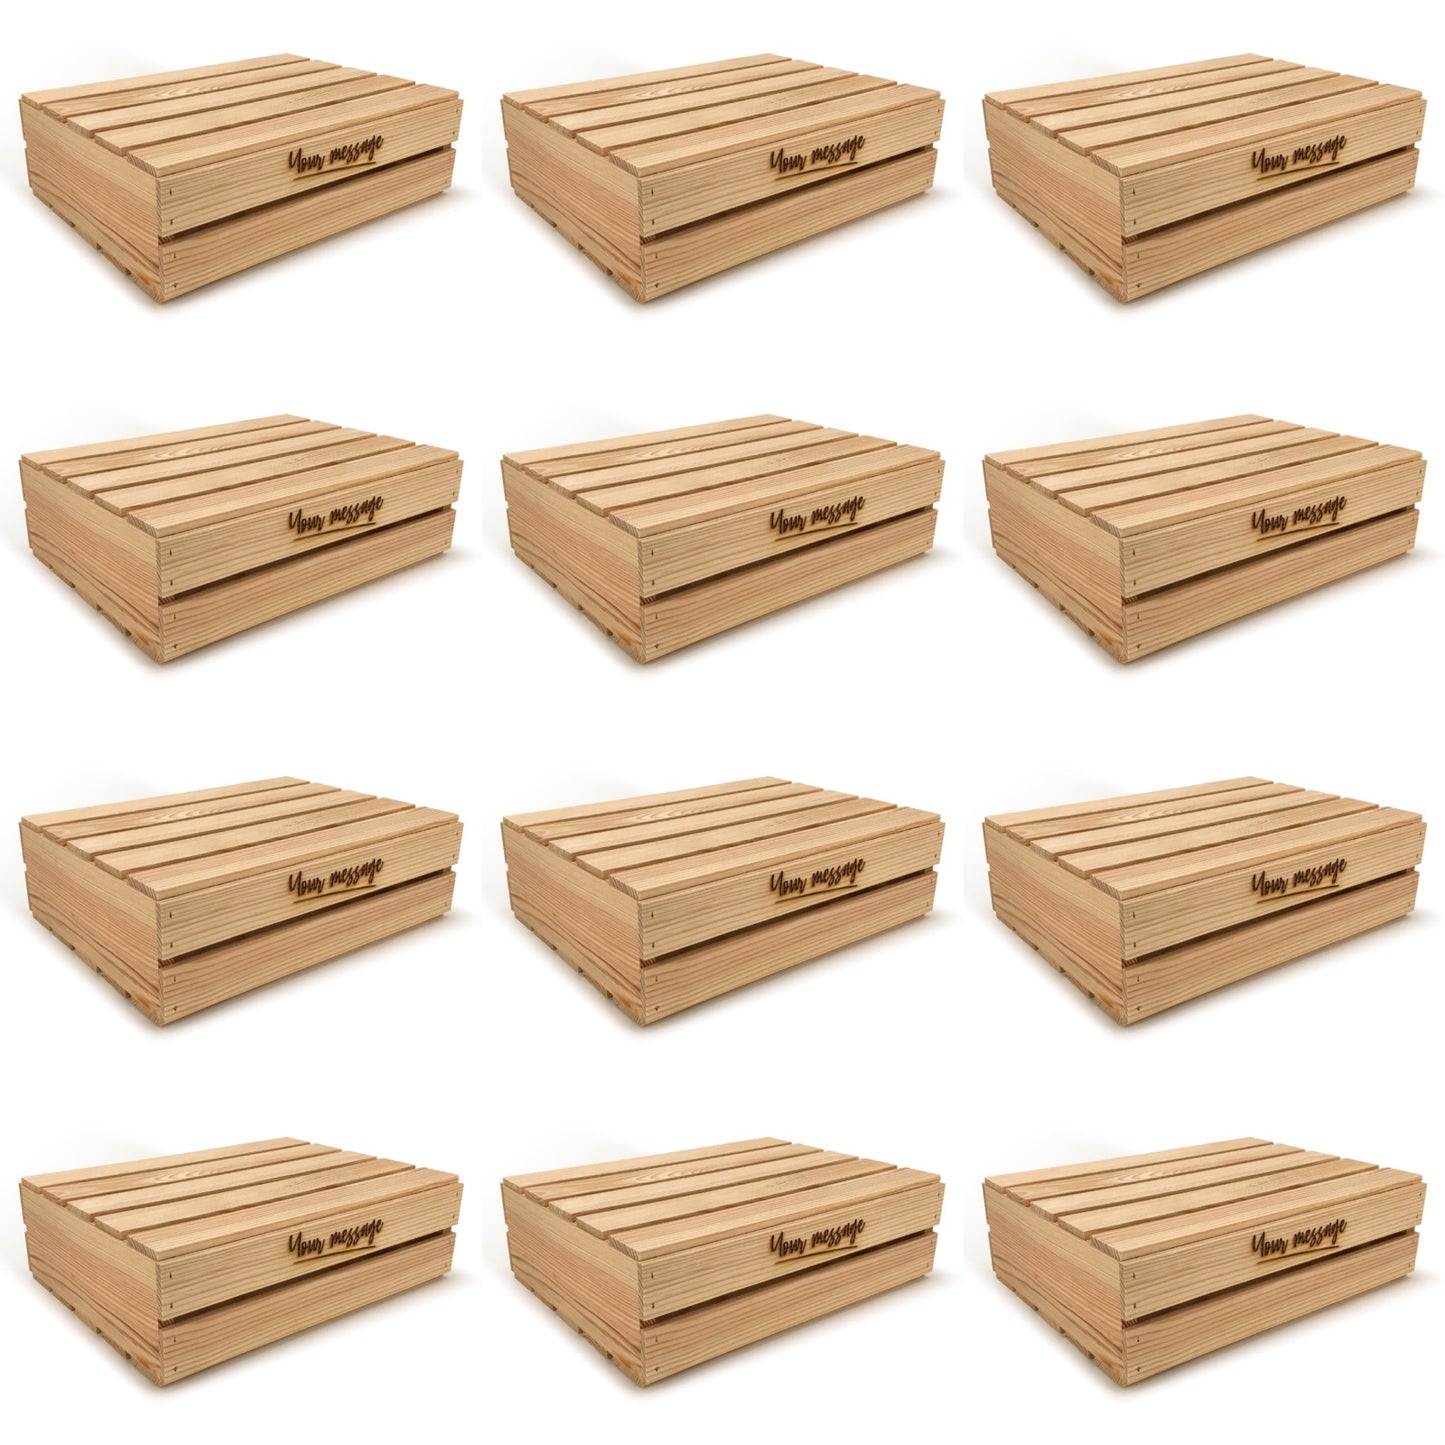 12 Small wooden crates with lid and custom message 18x14x5.25, 6-WS-18-14-5.25-ST-NW-LL, 12-WS-18-14-5.25-ST-NW-LL, 24-WS-18-14-5.25-ST-NW-LL, 48-WS-18-14-5.25-ST-NW-LL, 96-WS-18-14-5.25-ST-NW-LL